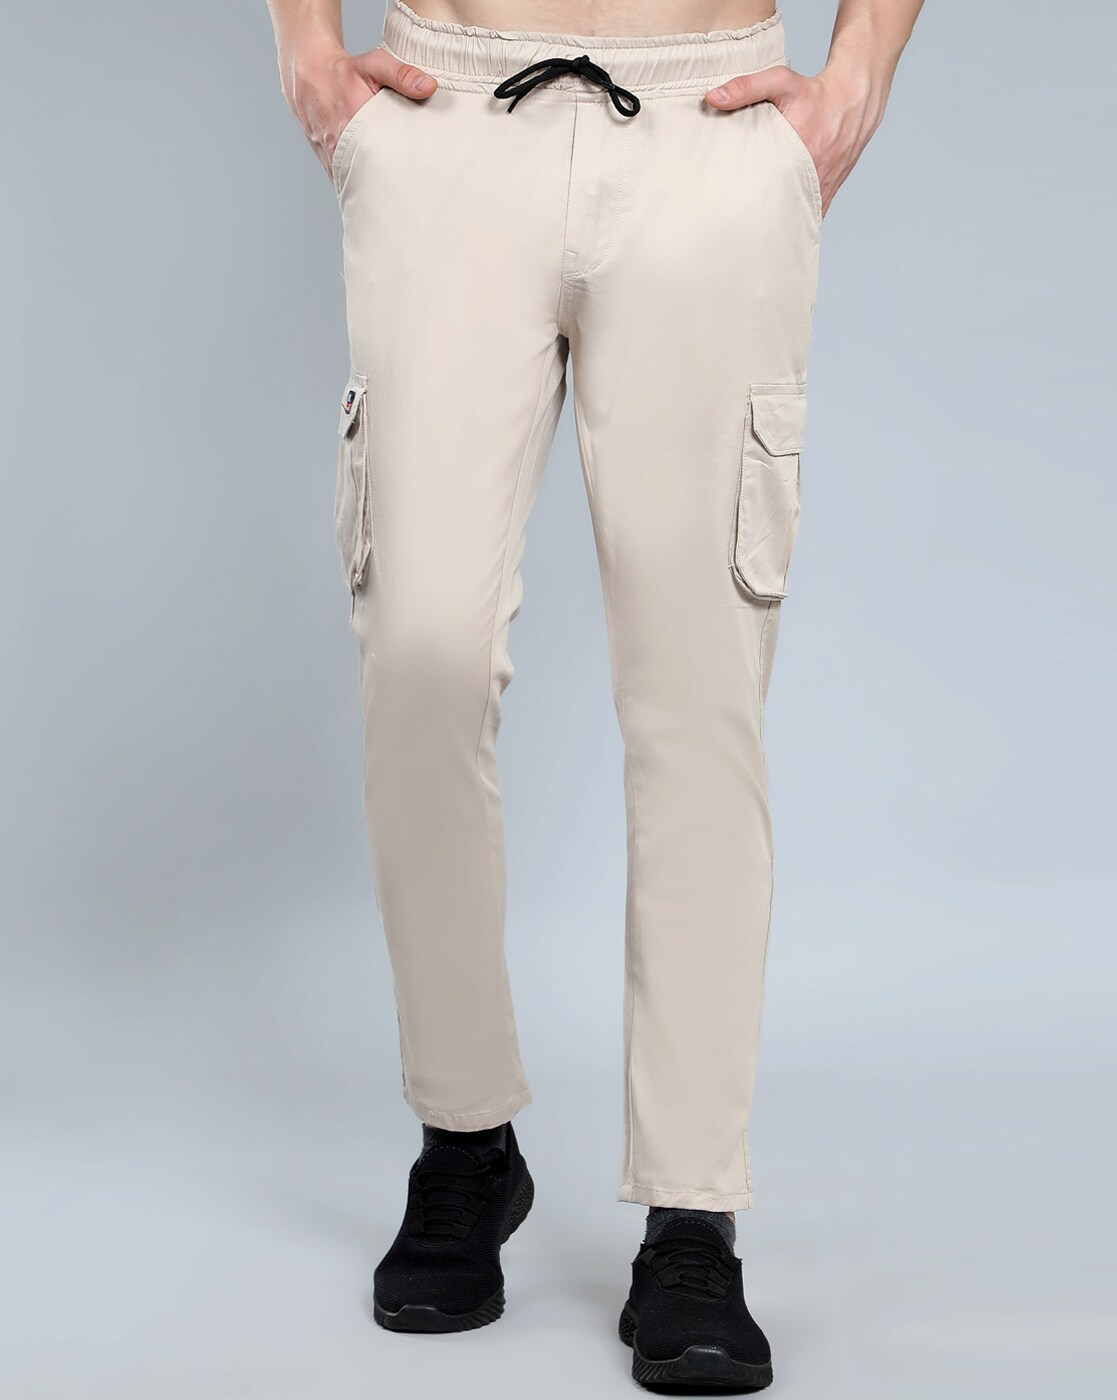 Highlander Trousers - Buy Highlander Trousers Online in India